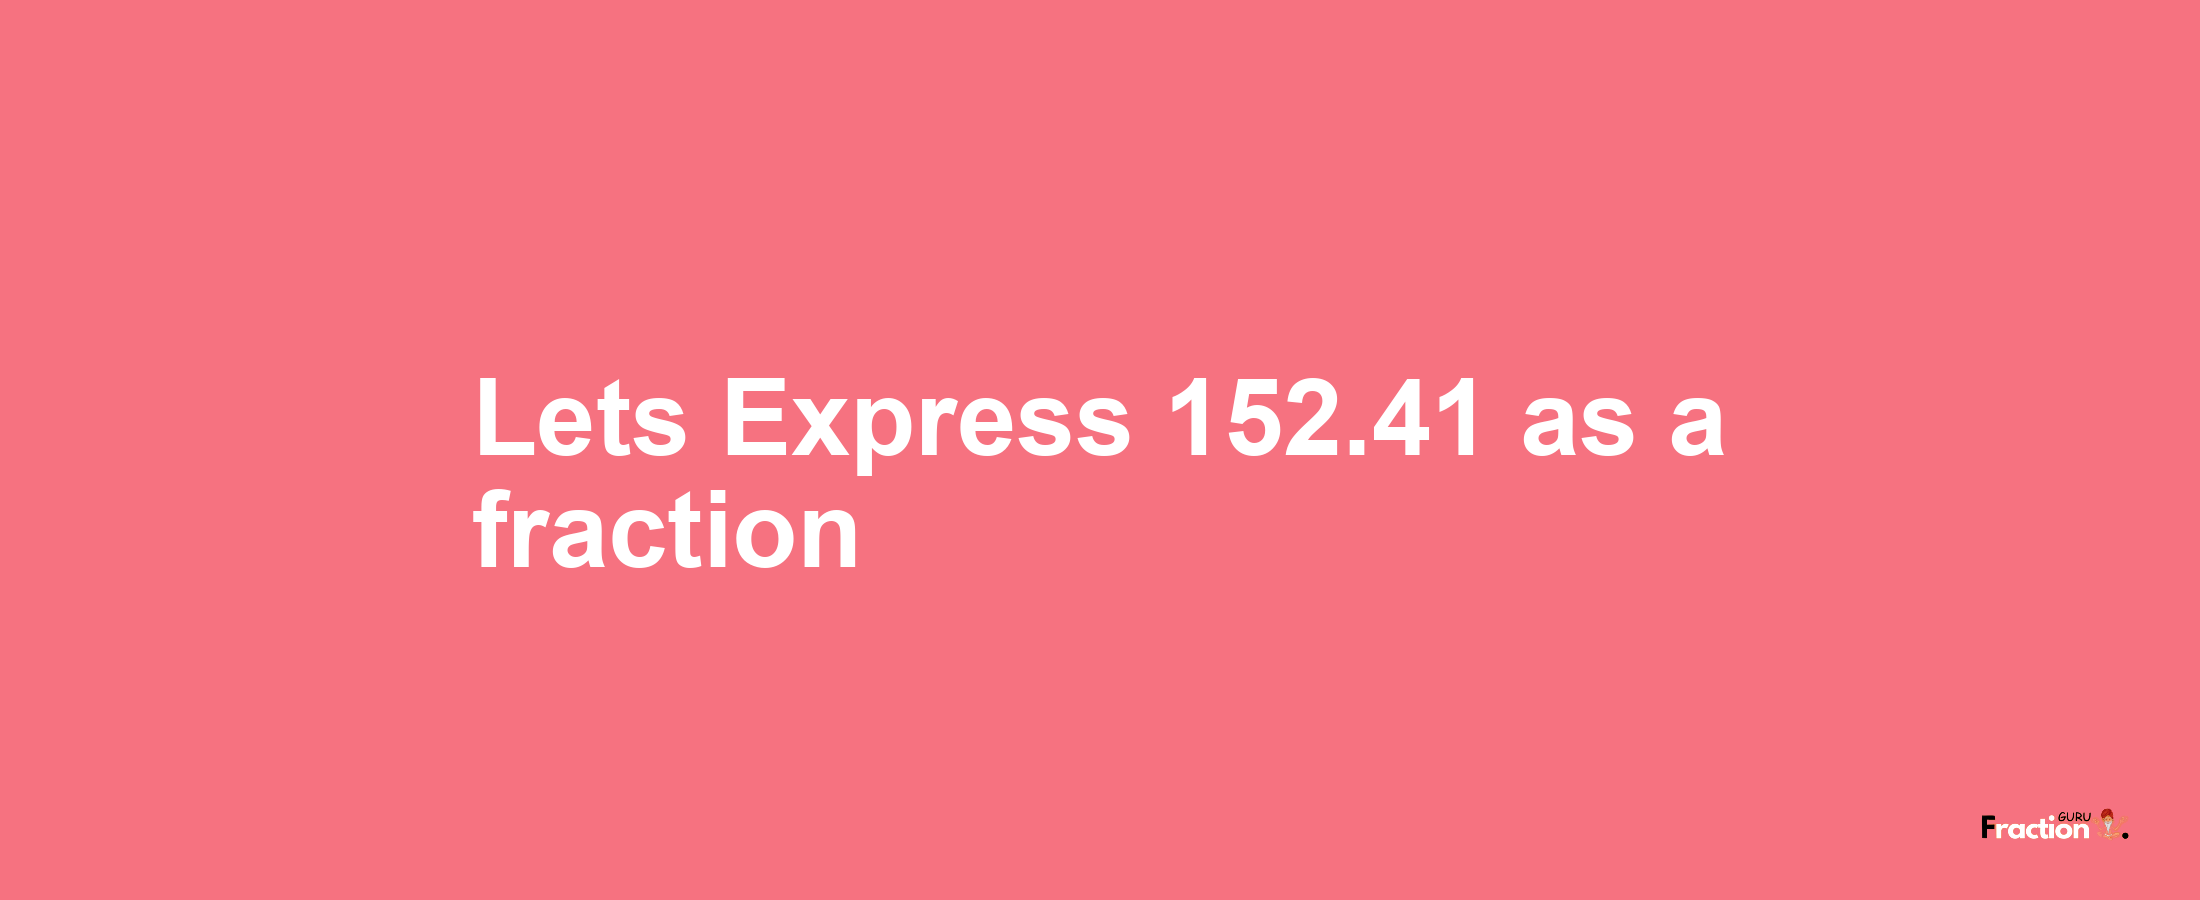 Lets Express 152.41 as afraction